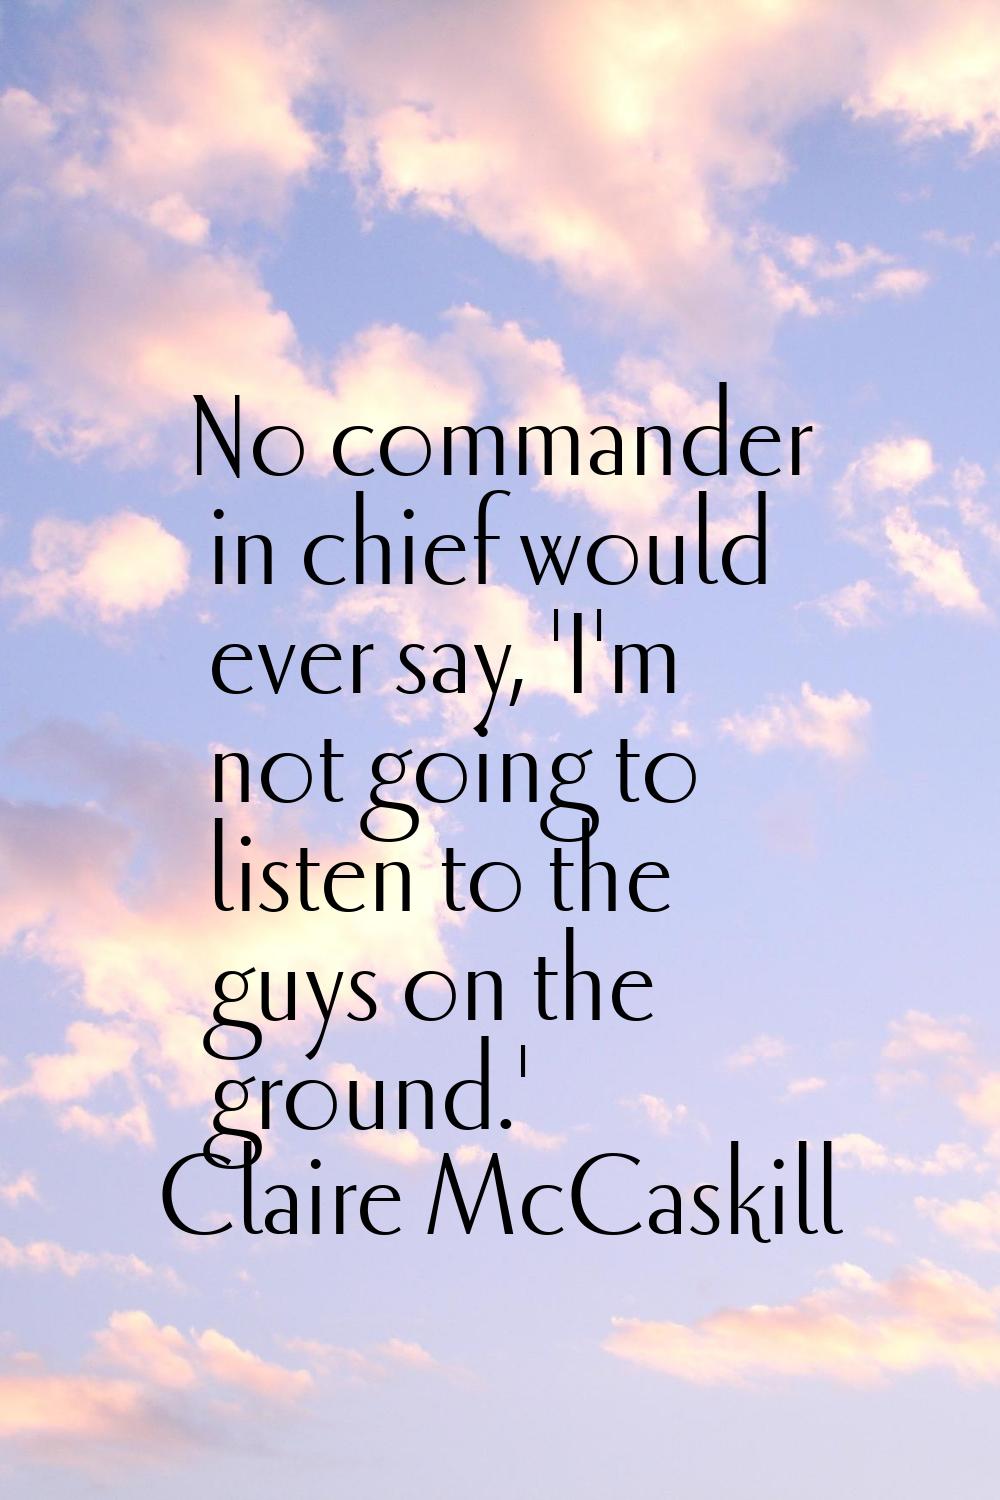 No commander in chief would ever say, 'I'm not going to listen to the guys on the ground.'